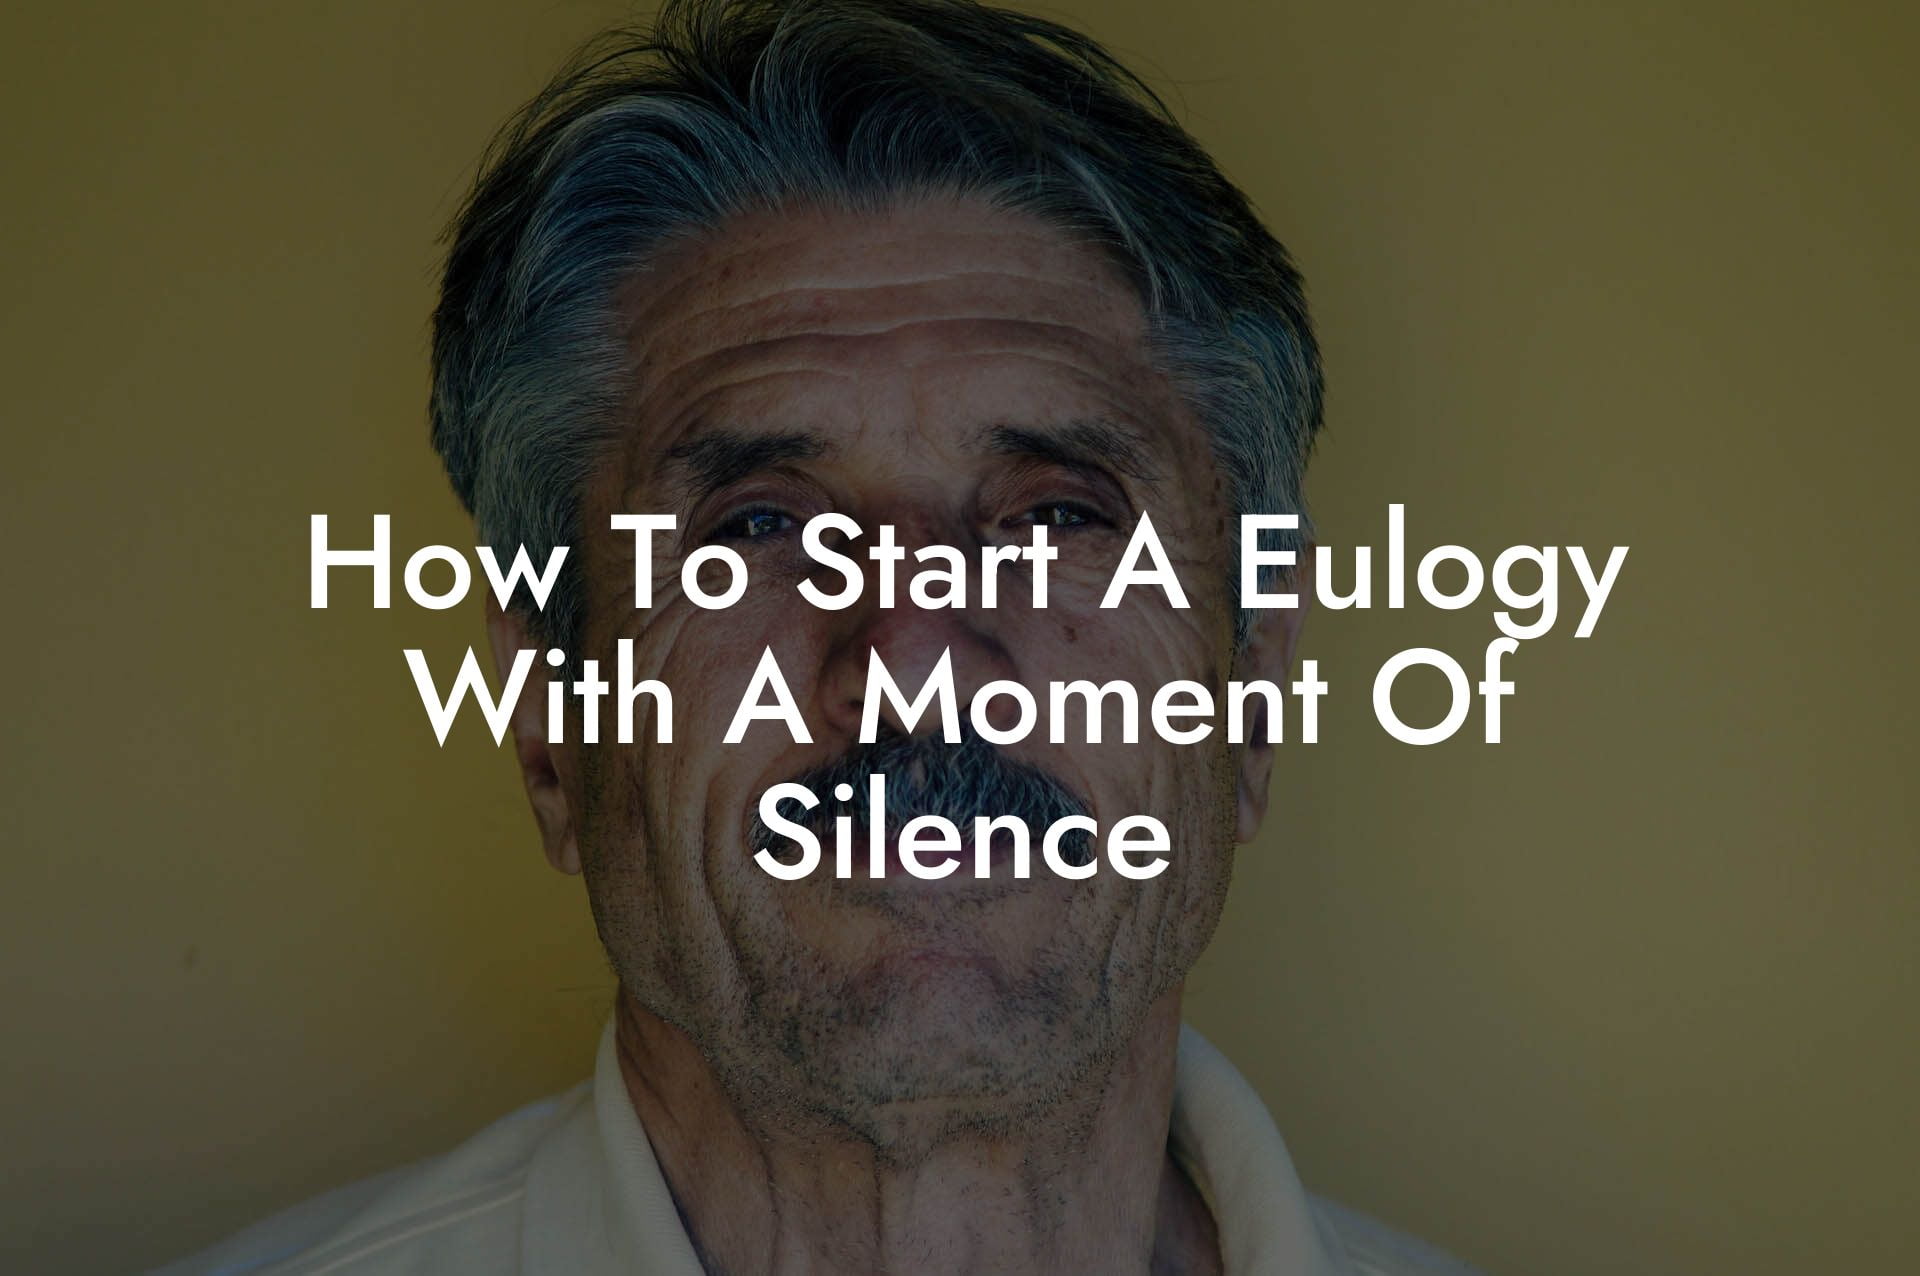 How To Start A Eulogy With A Moment Of Silence